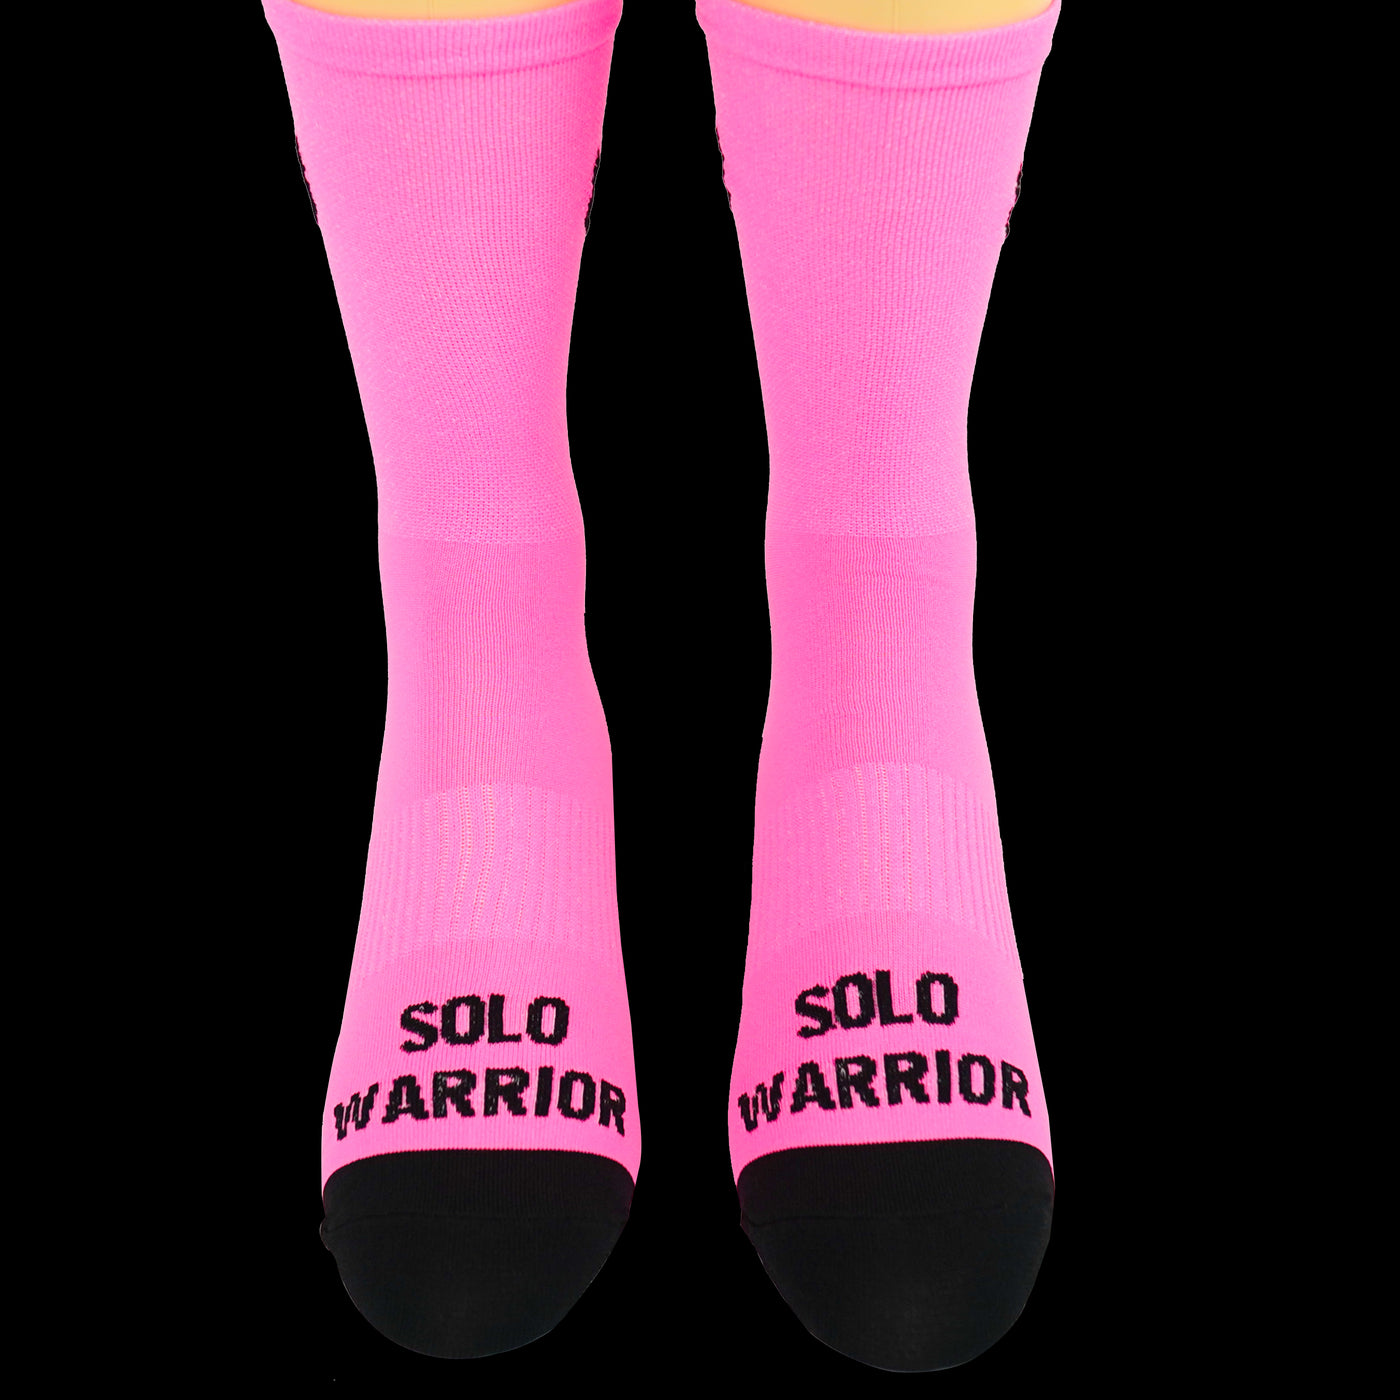 The New 2.0 6” Men’s and Women’s, Solid Fluorescent Pink, Compression, Cycling socks.